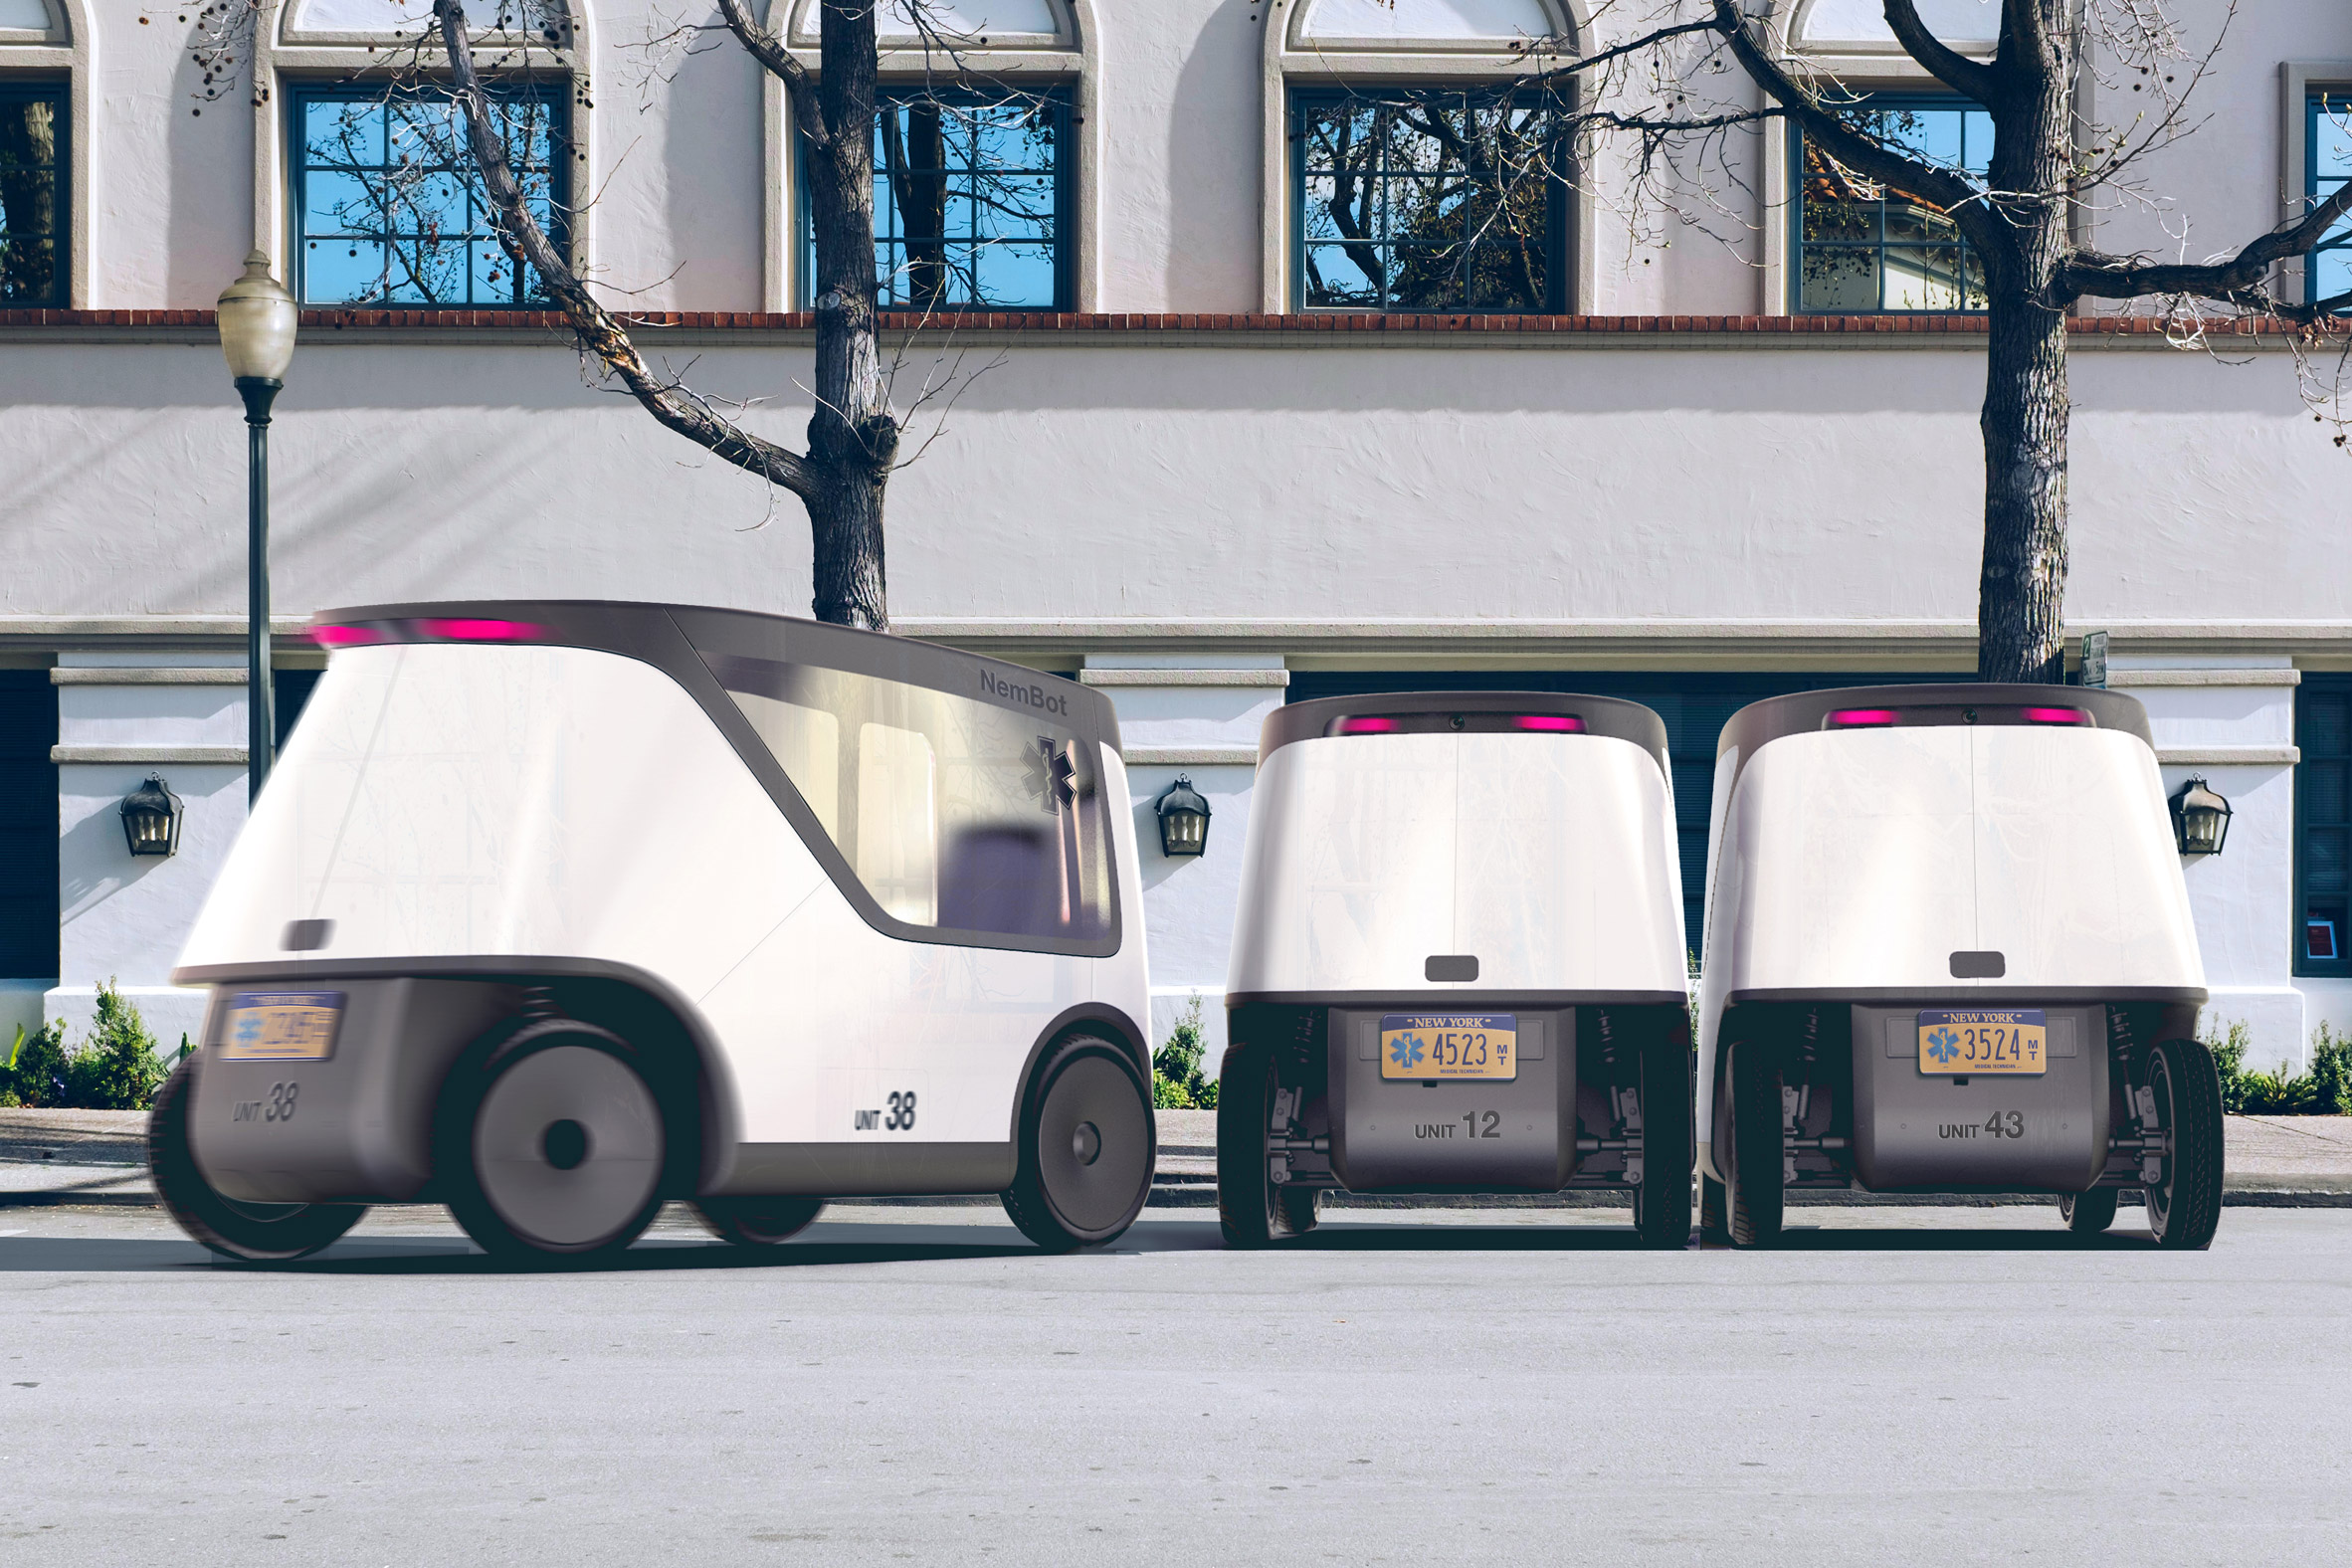 Jens Martin Skibsted designs “pandemic proof” non-emergency medical transport for cities